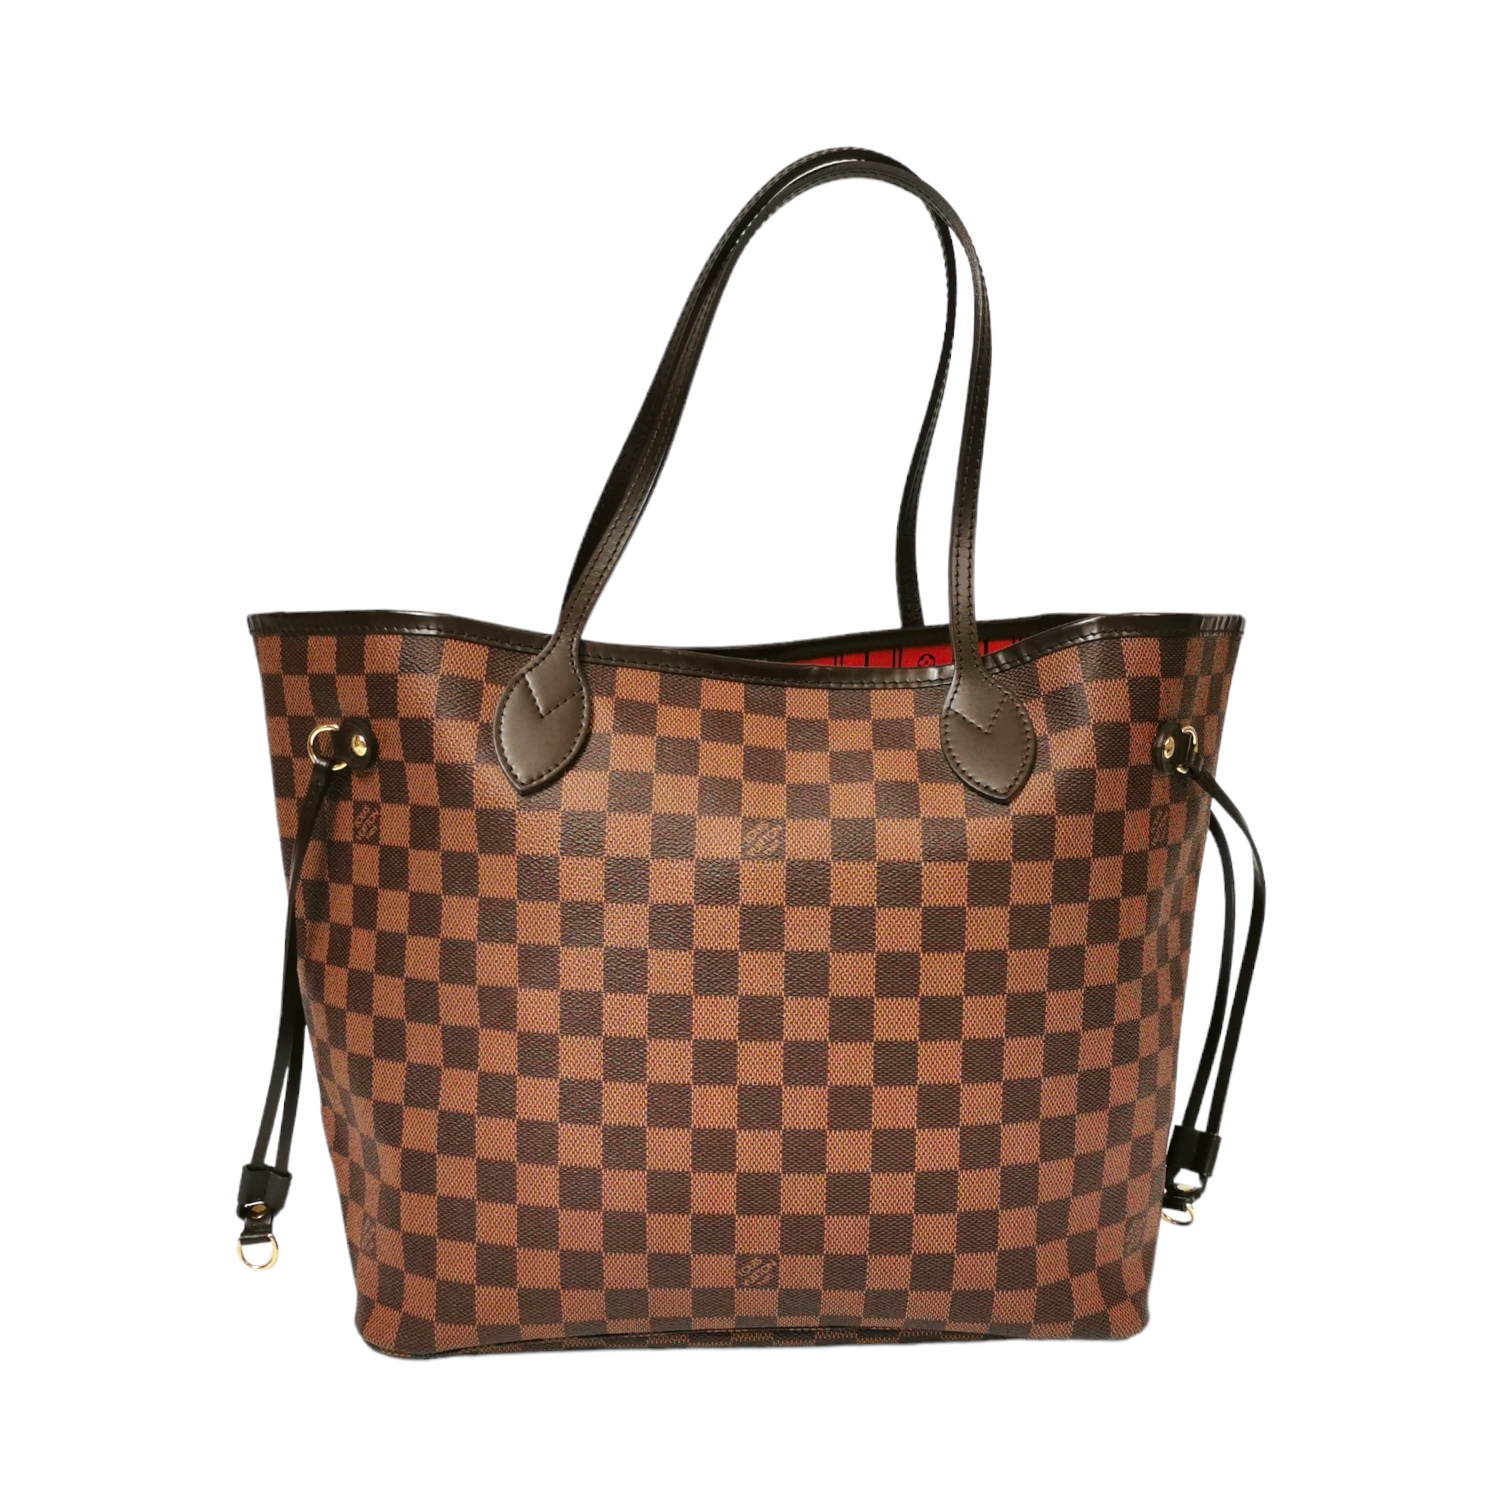 Louis Vuitton Neverful GM Handbag In Damier Canvas: Why I Own It